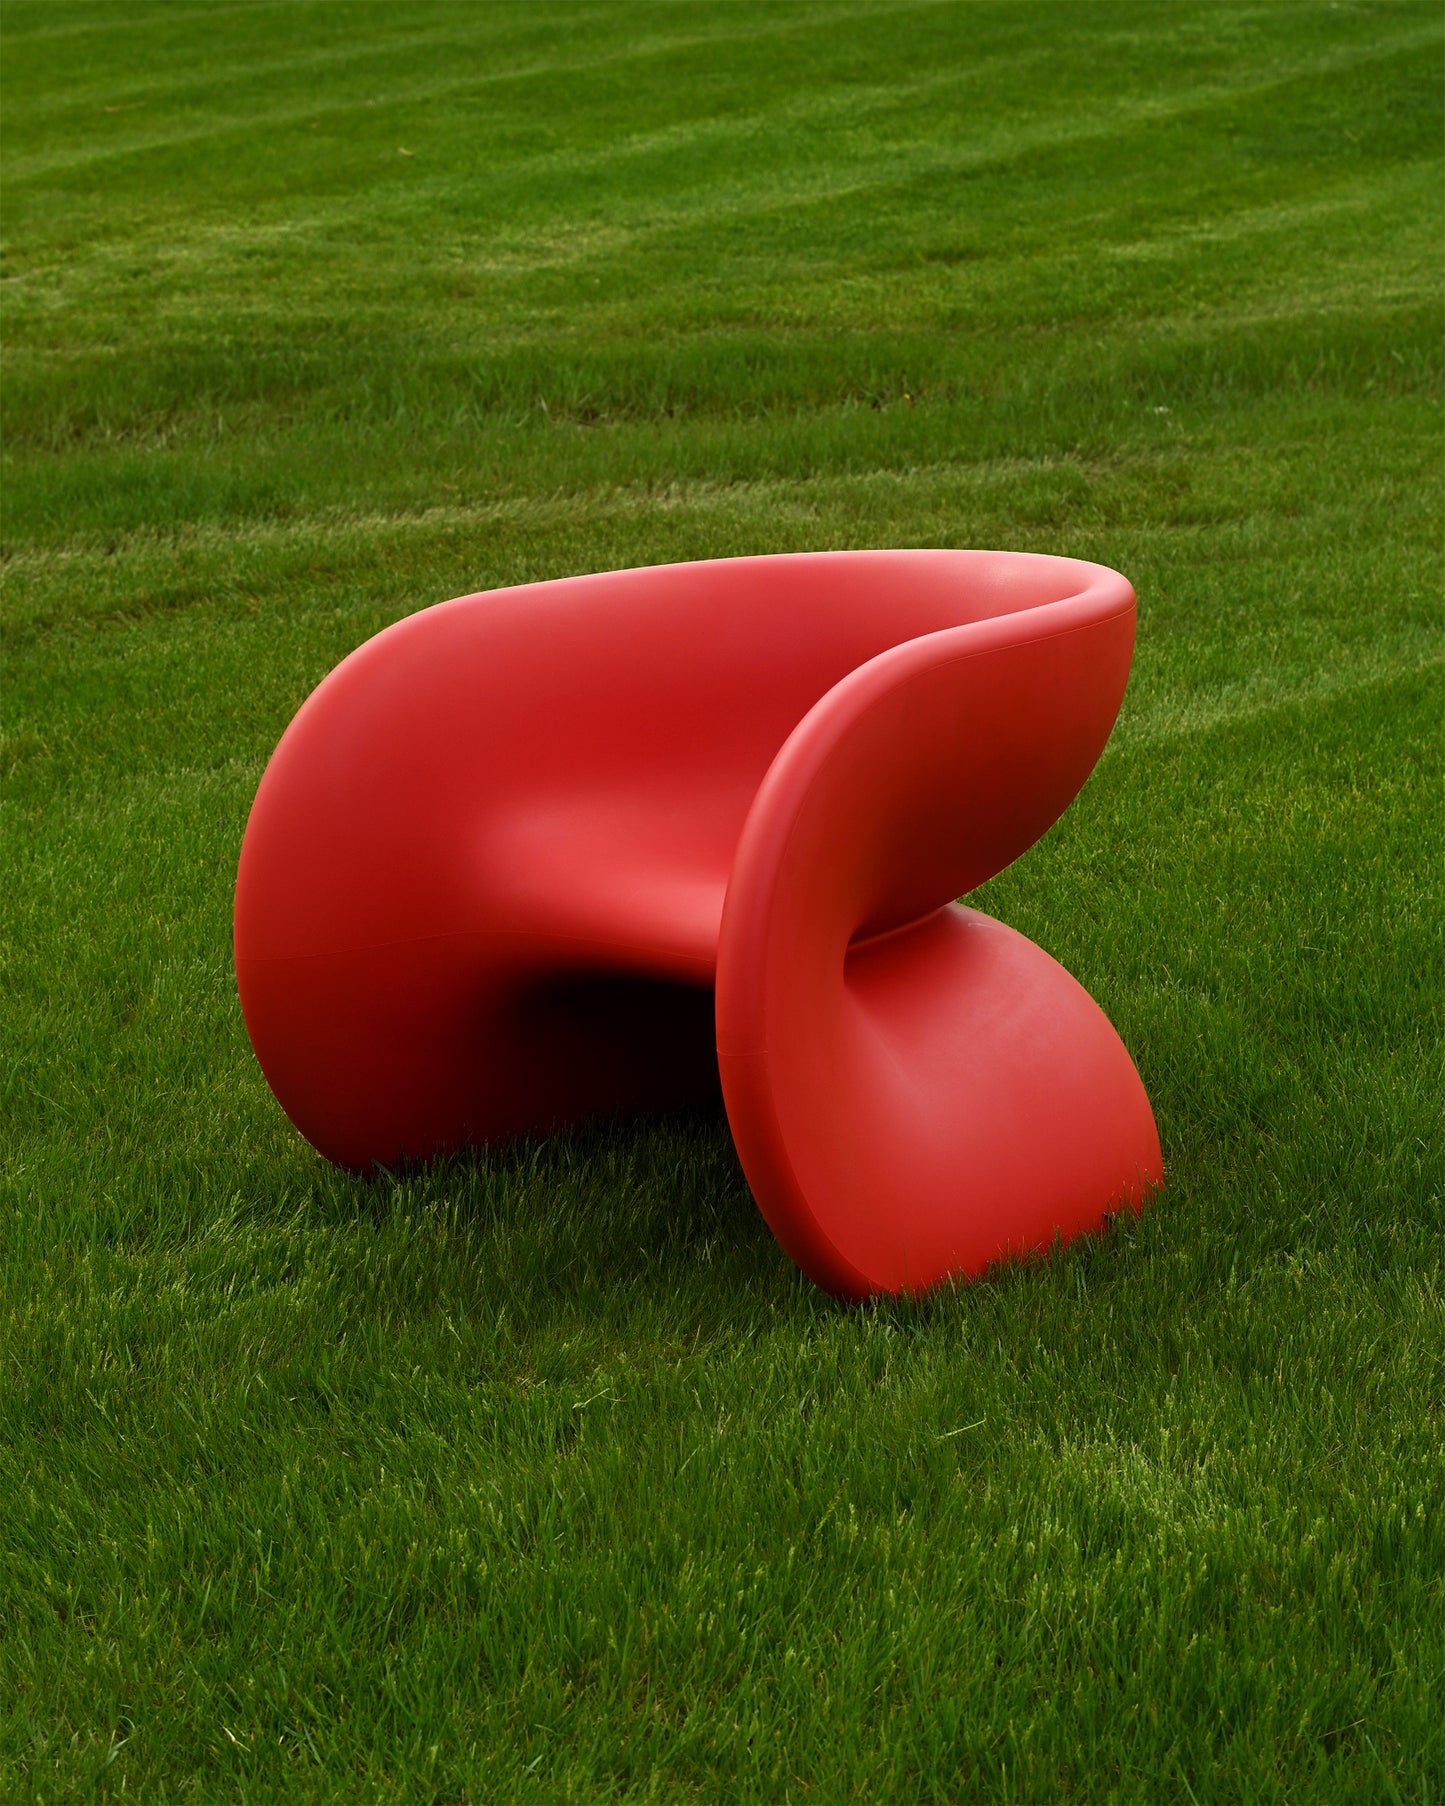 Fortune Chair